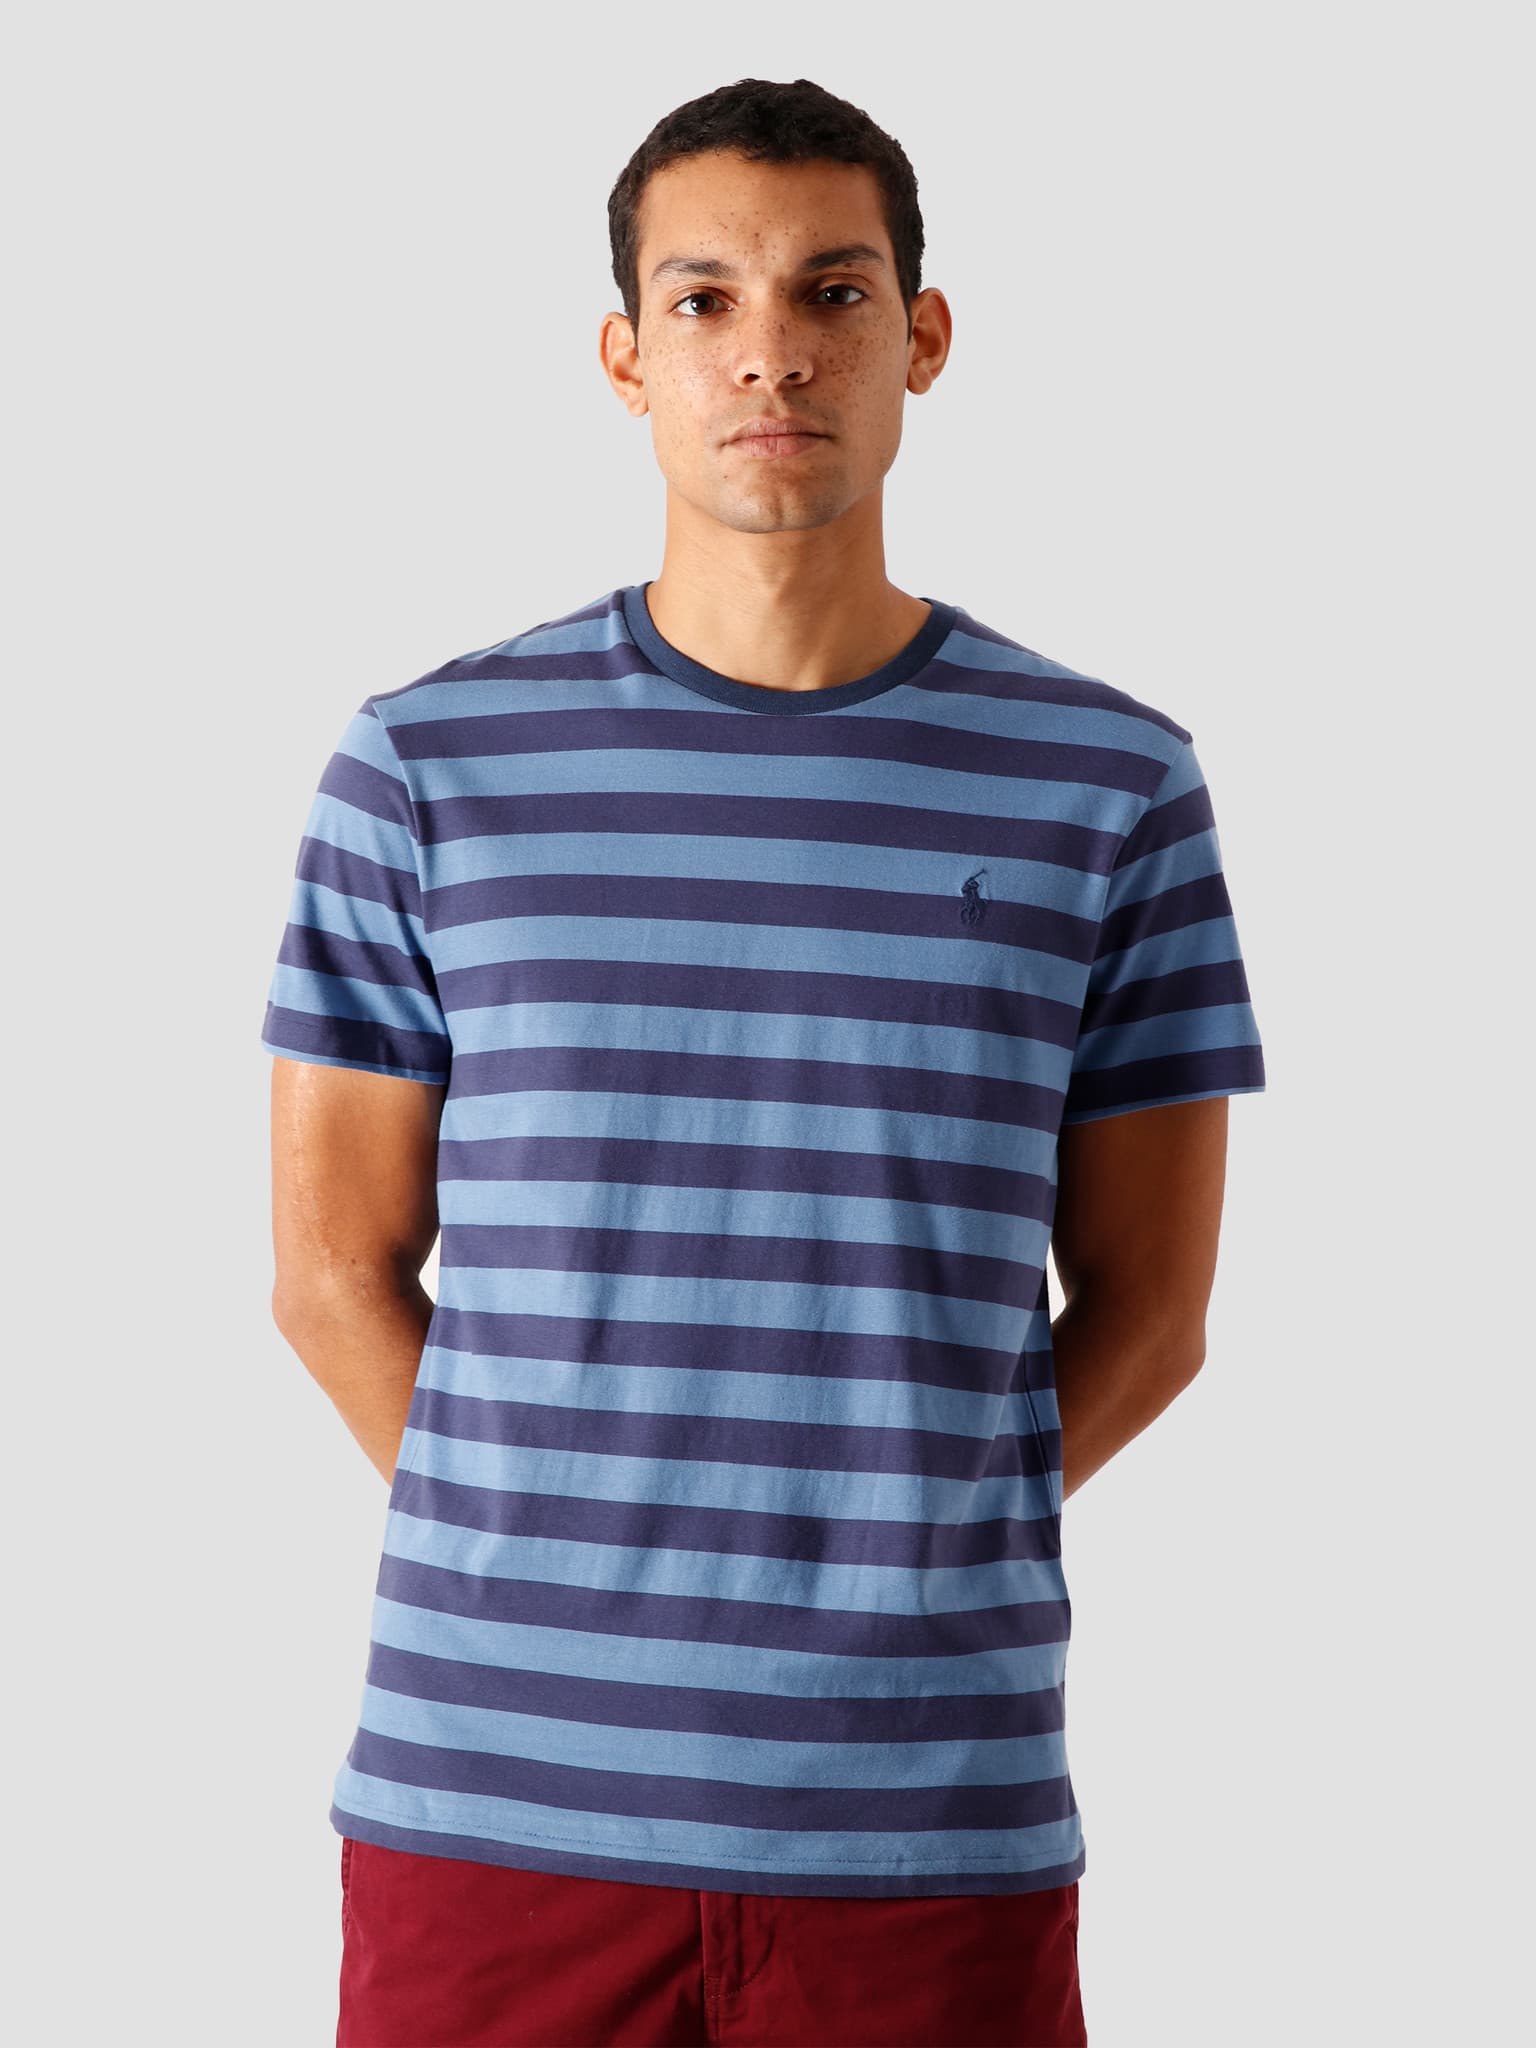 26-1'S Jersey T-Shirt Boathouse Navy-French Blue 710803479001